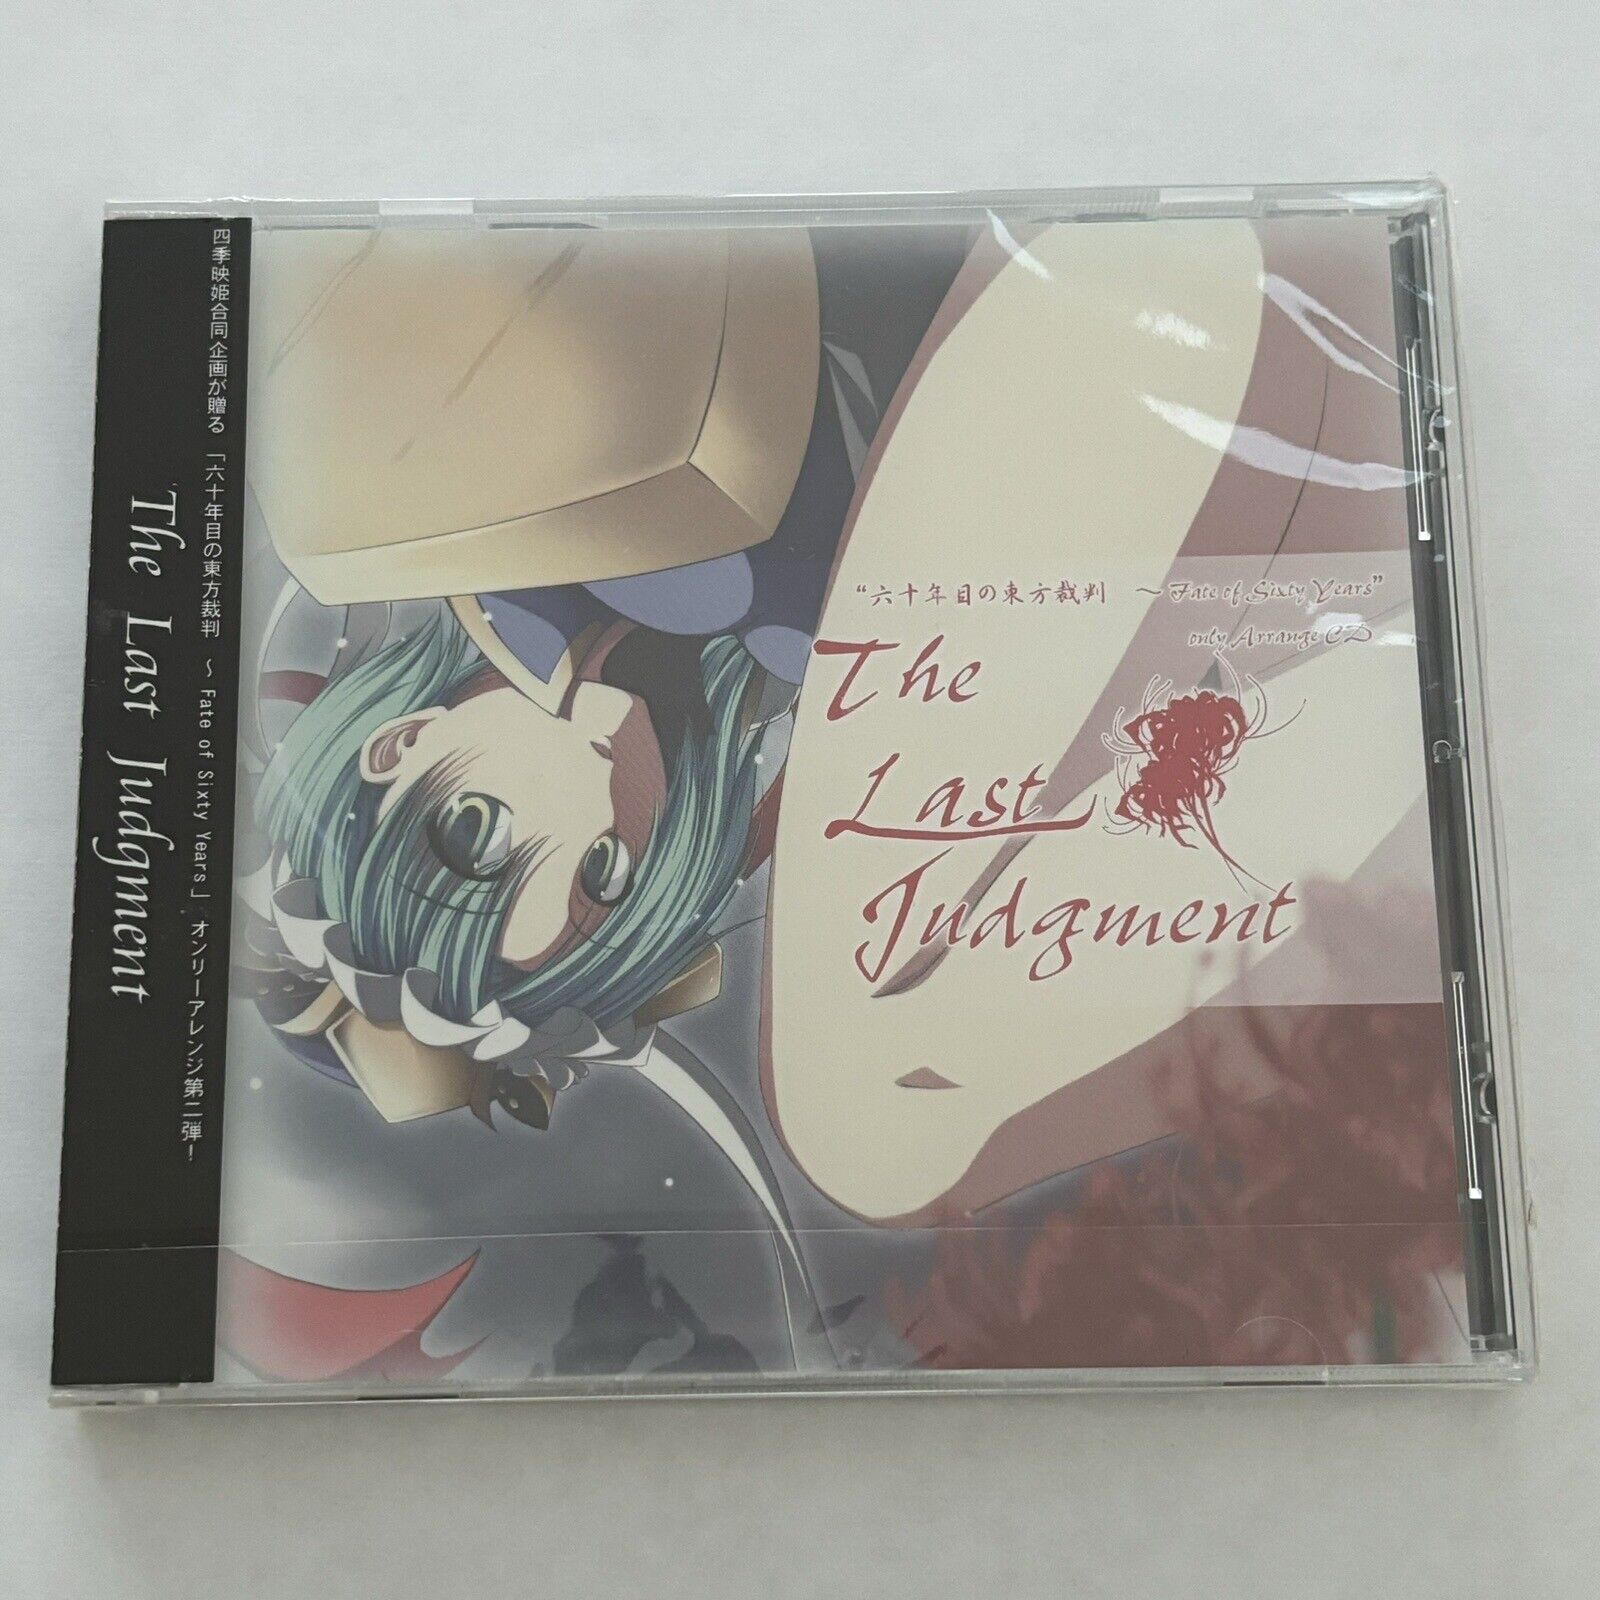 New The Last Judgement Album Doujin Japan Import CD Fate of Sixty Years EIKI